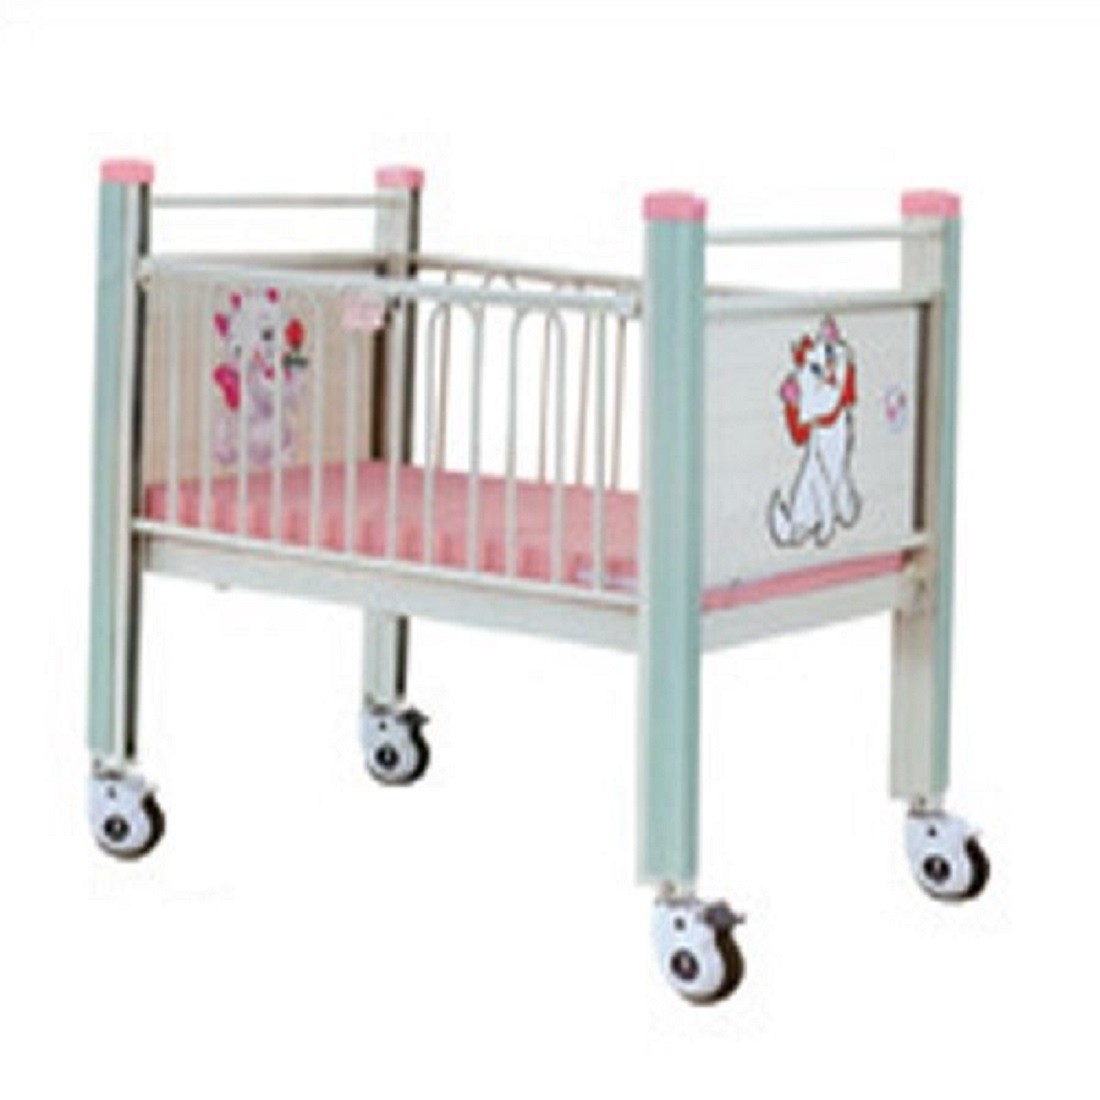 Best CE Single Crank Manual H58mm Hospital Baby Bed wholesale